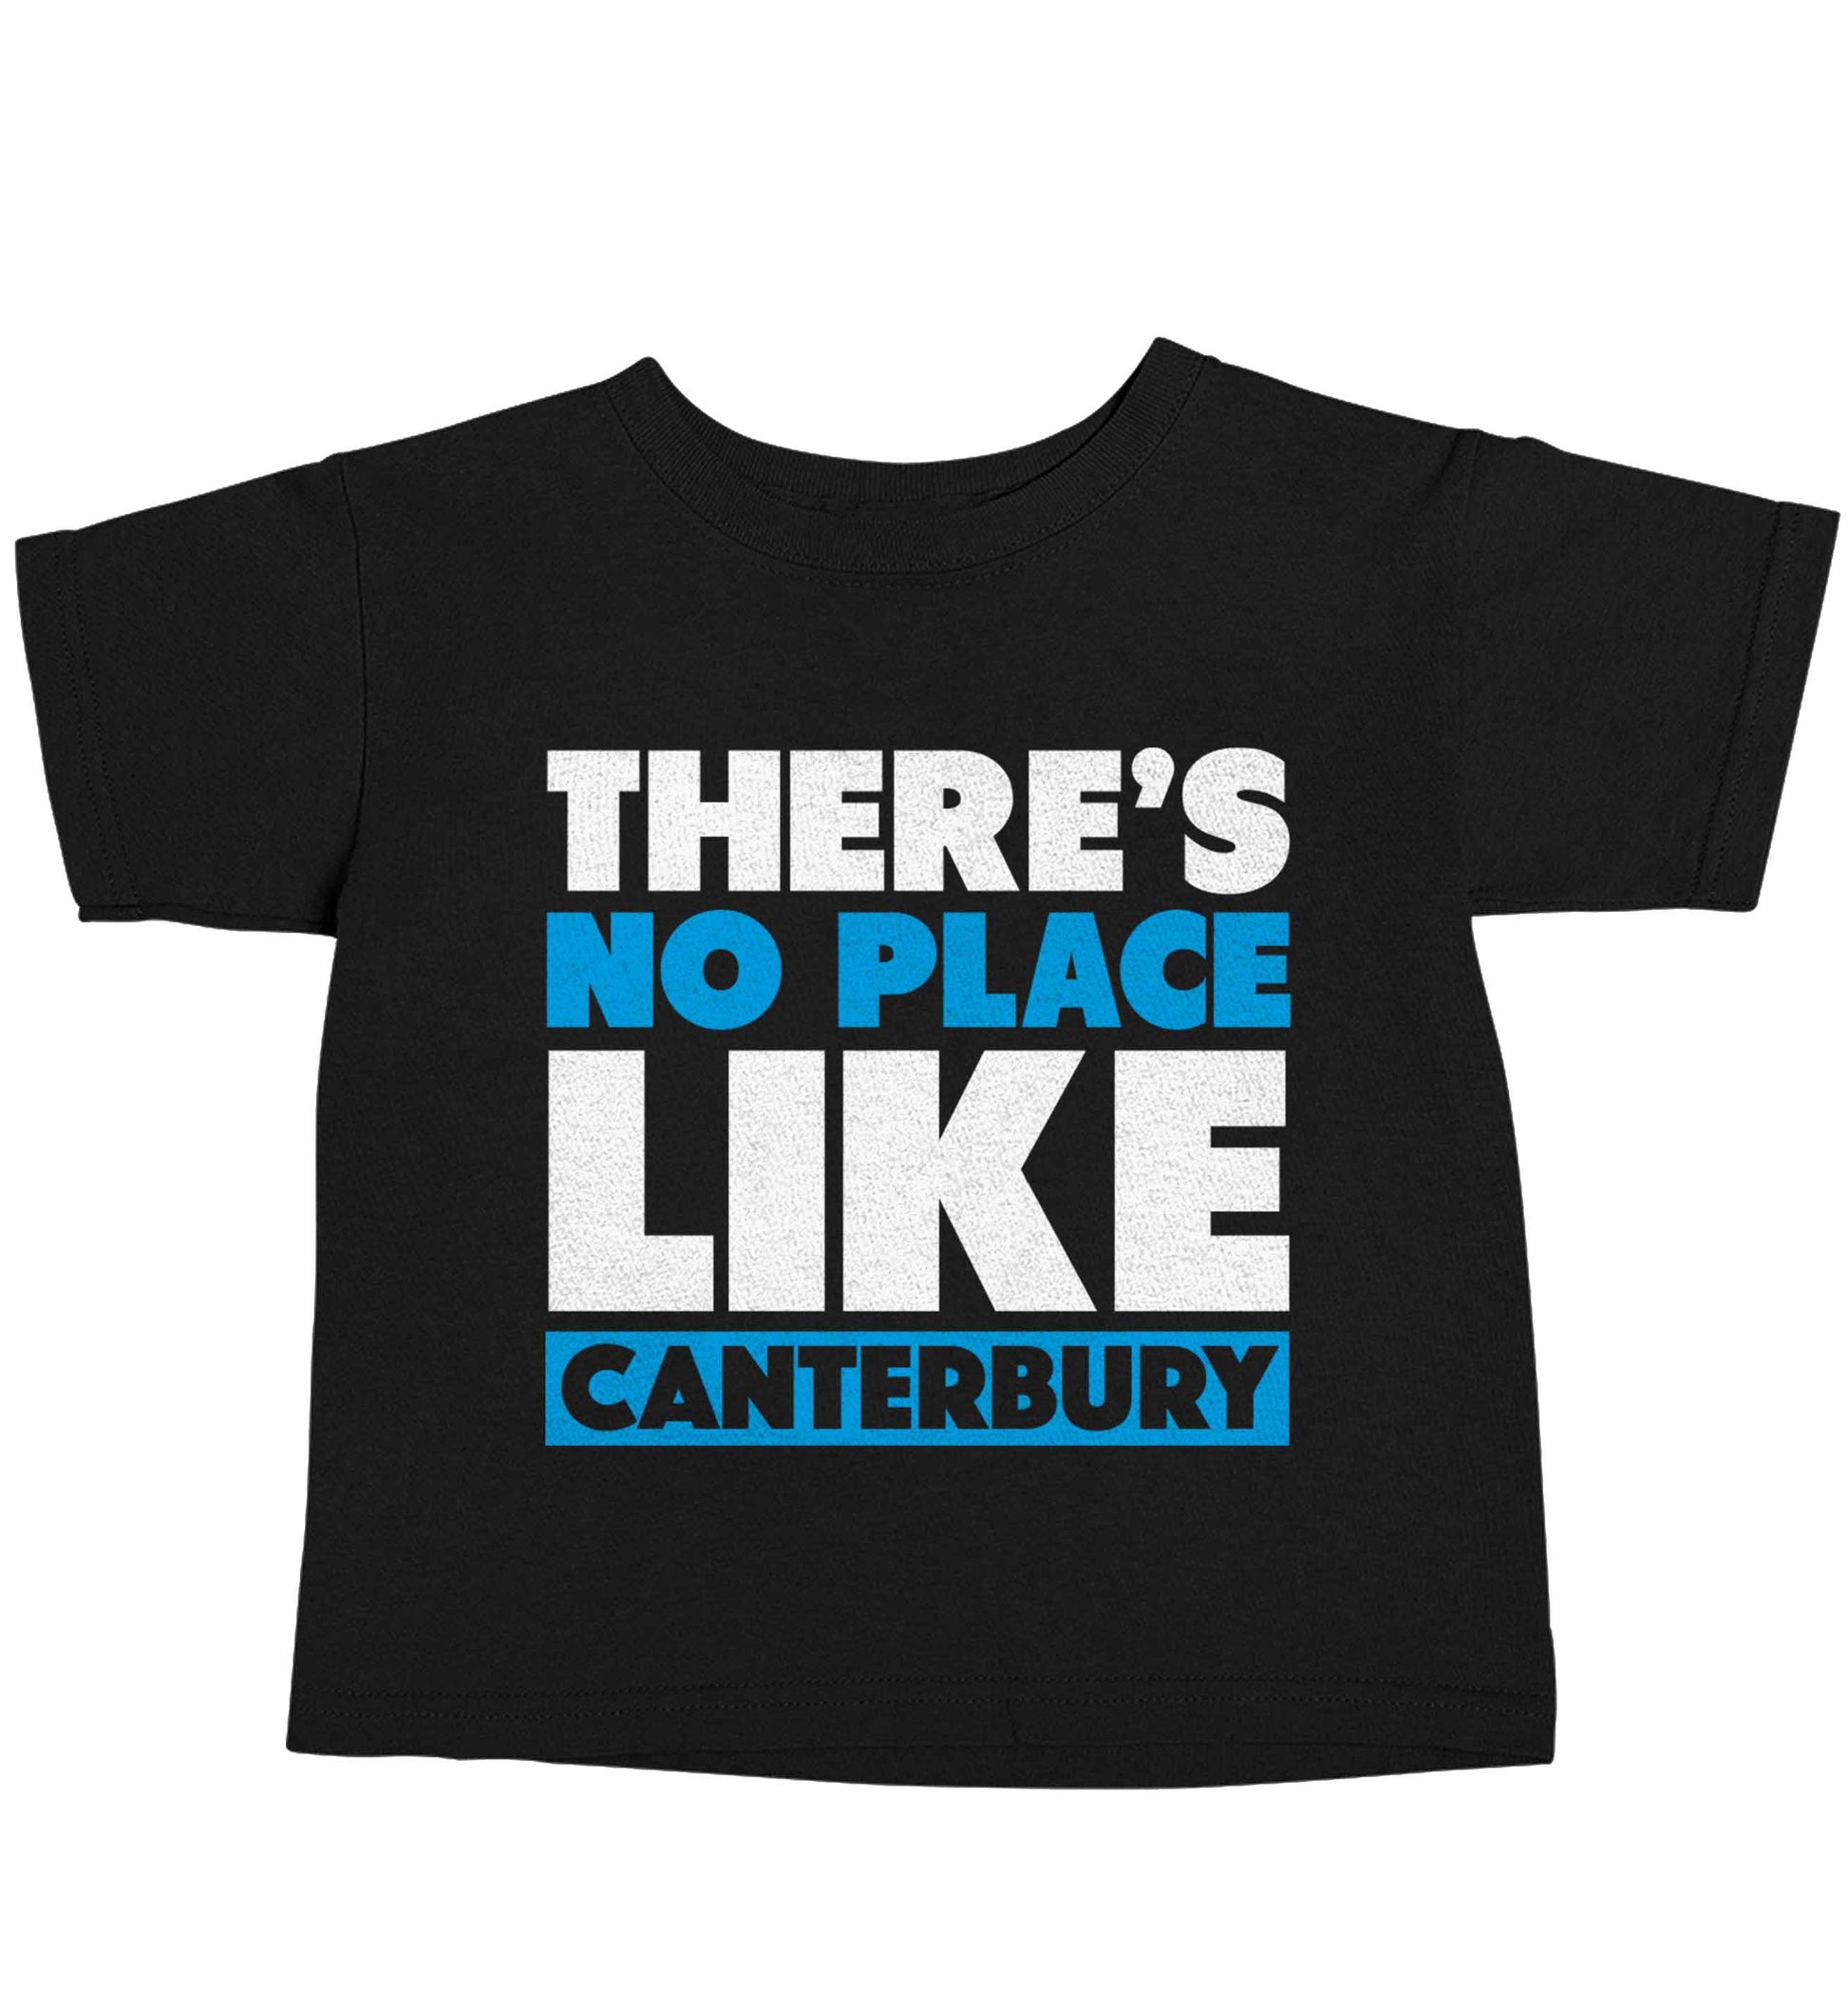 There's no place like Canterbury Black baby toddler Tshirt 2 years